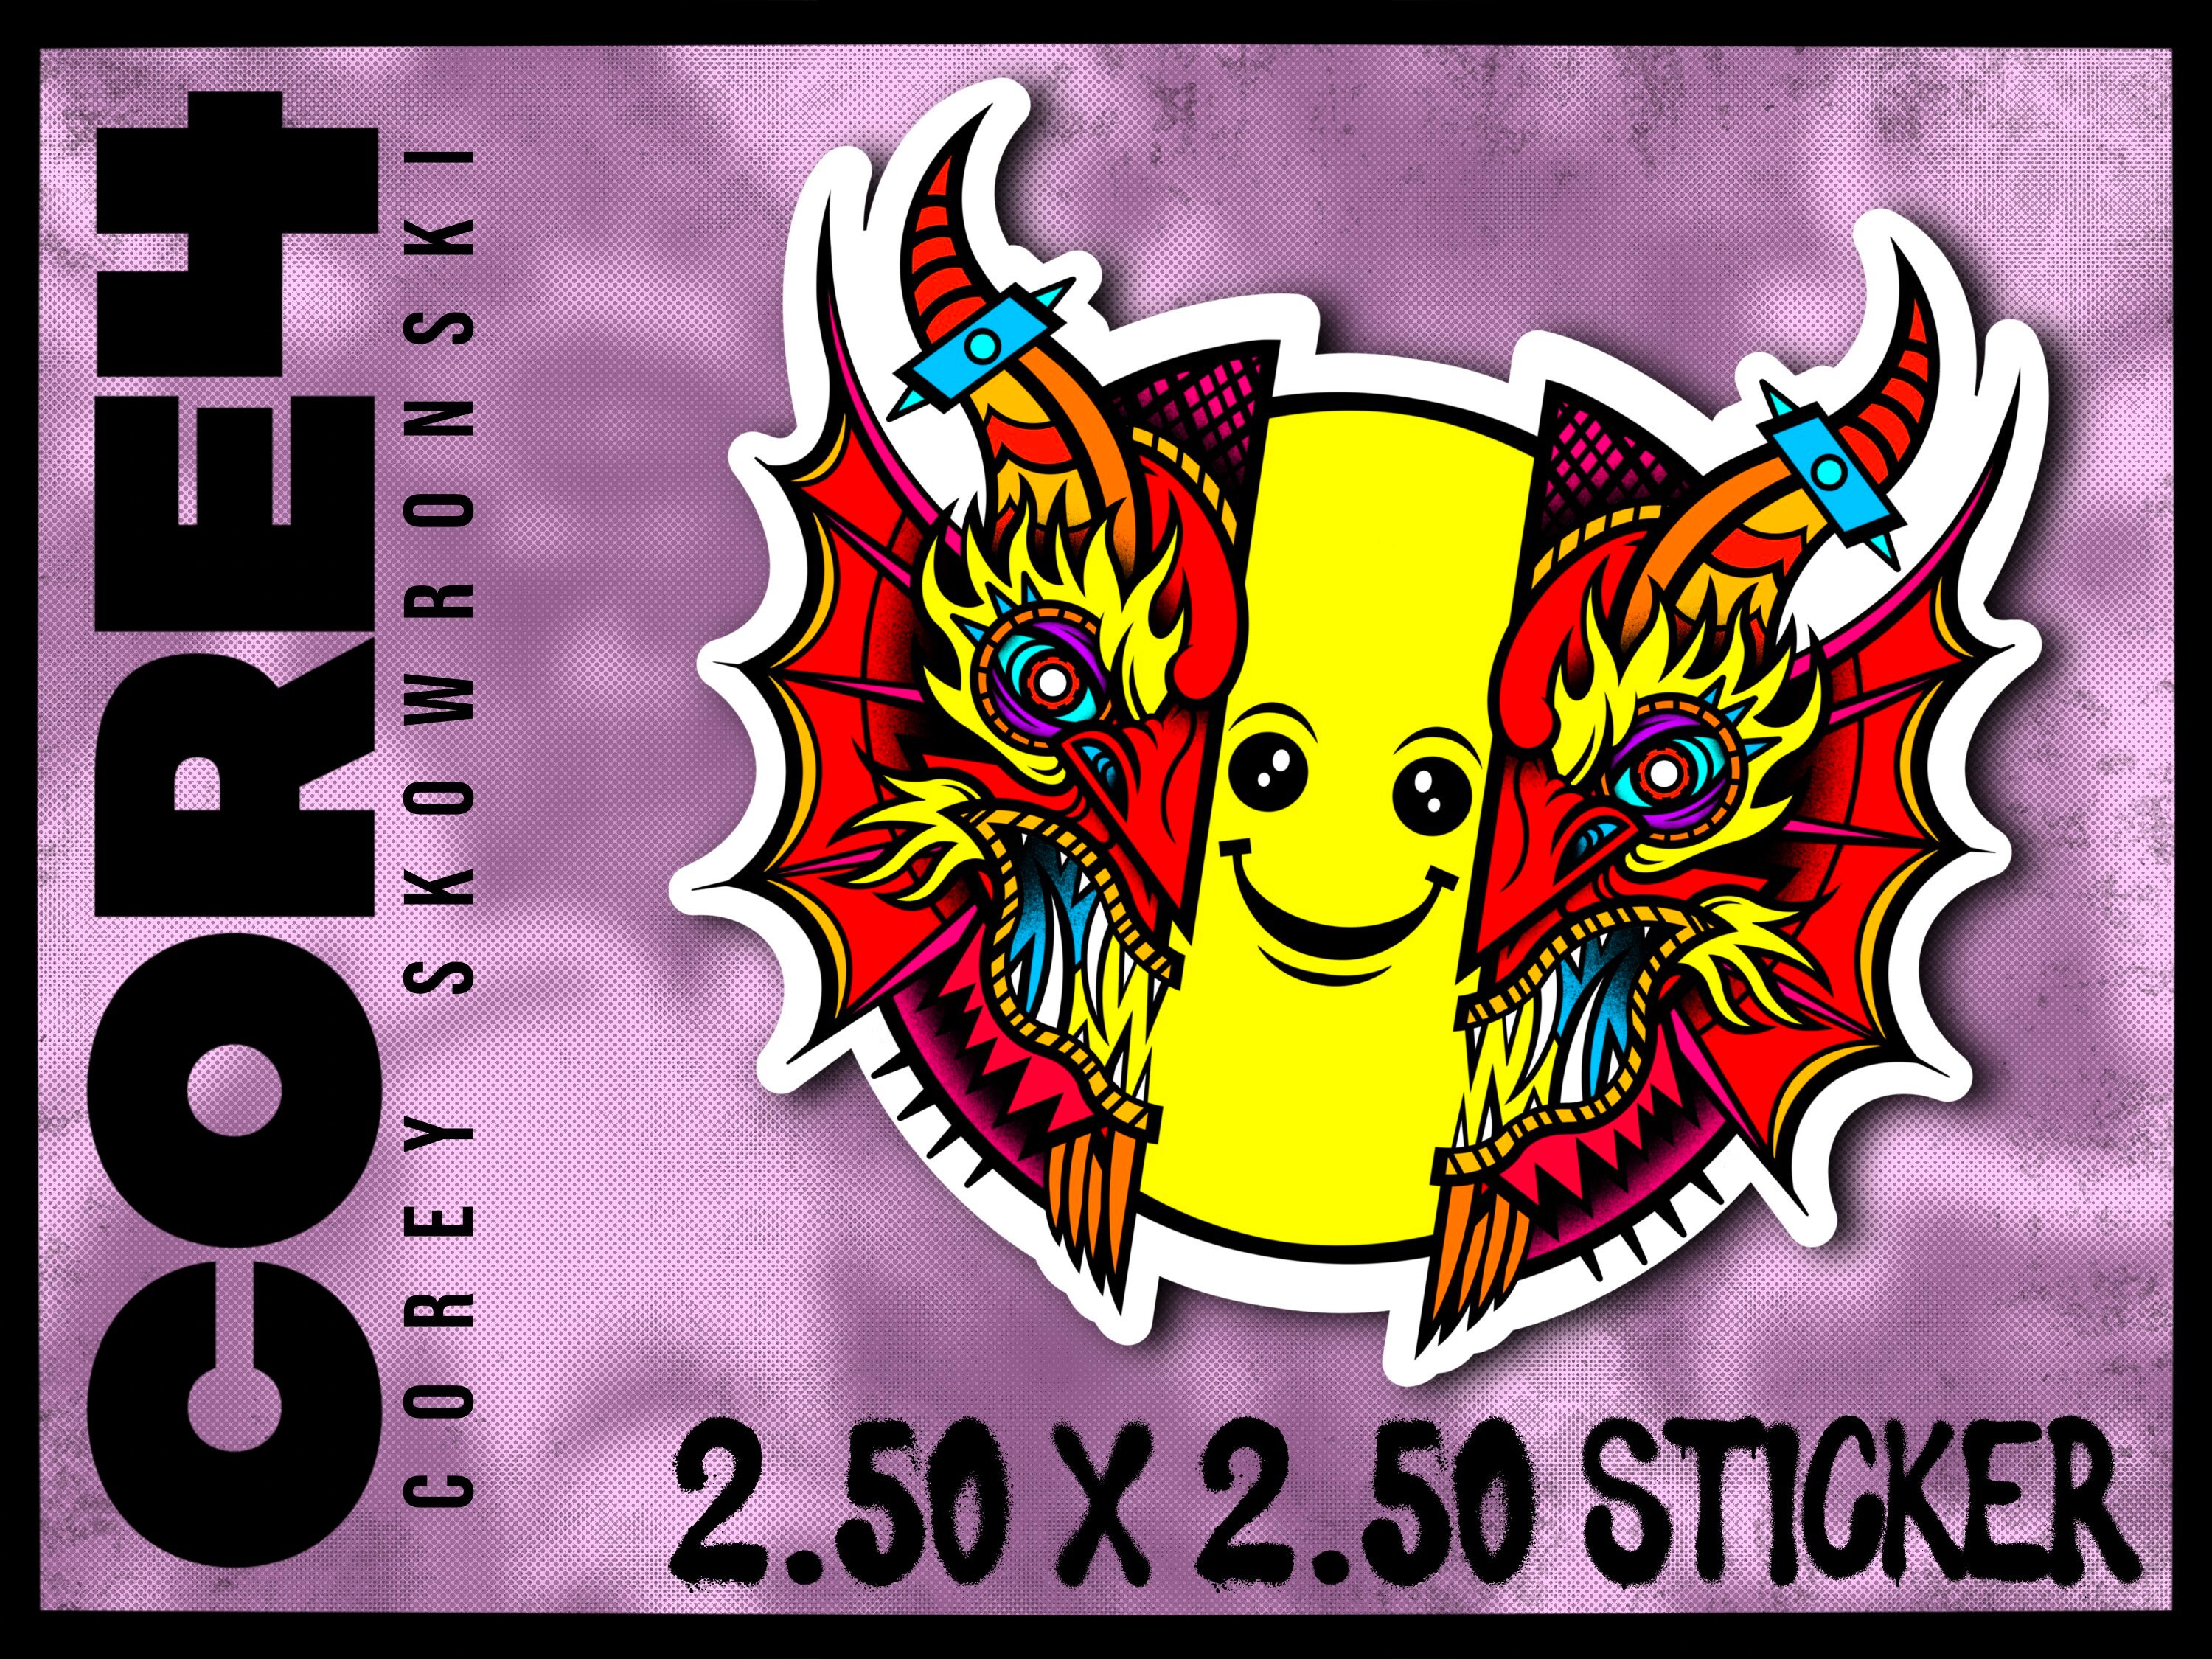 Smiley Sticker - order online now! New available